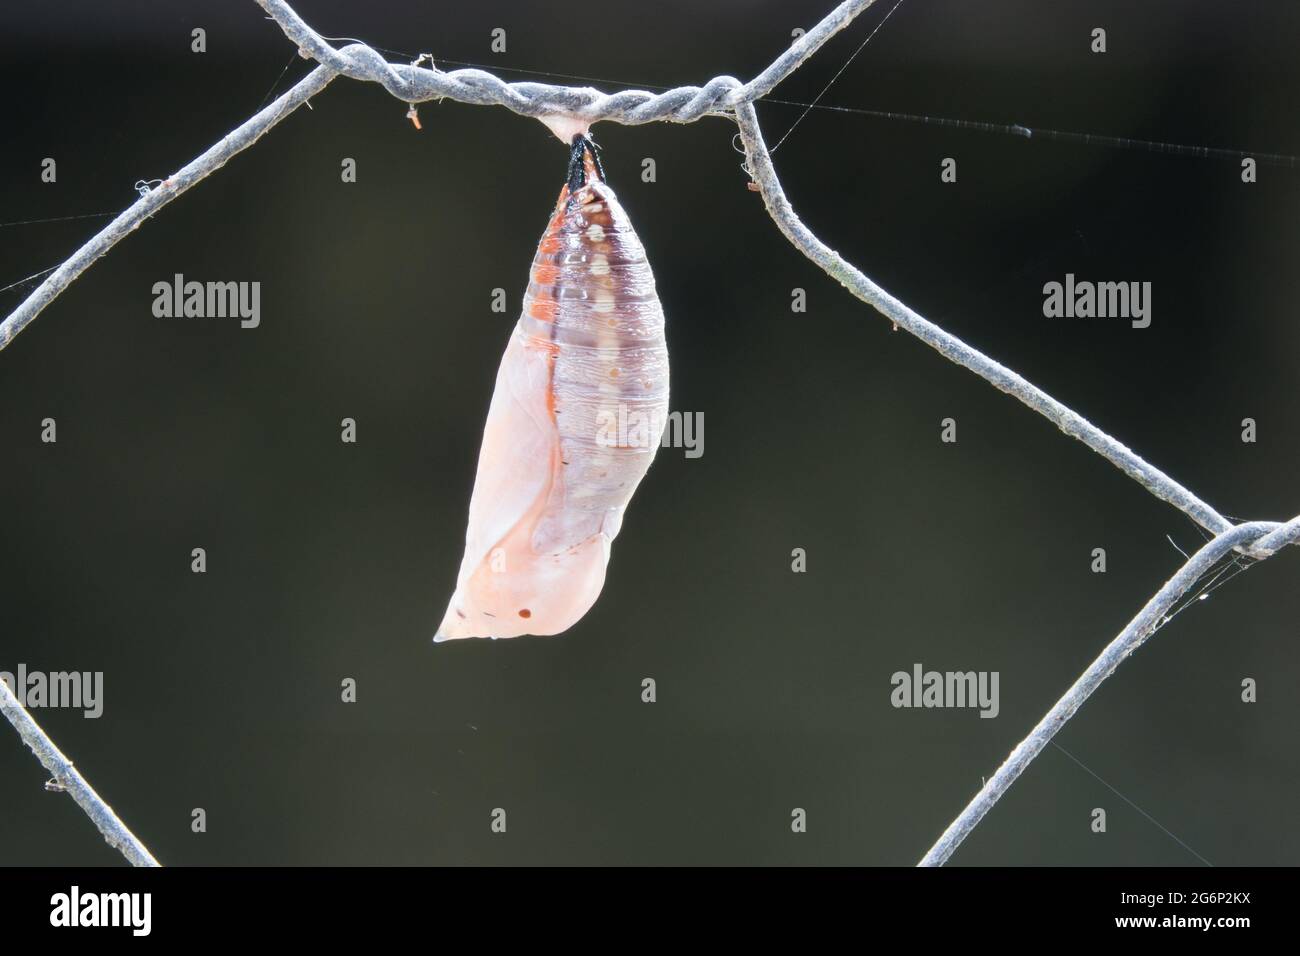 Newly formed Chrysalis of Australian Leafwing Butterfly (Doleschallia bisaltide)  on fence. Photographed at Cow Bay, Daintree, Far North Queensland, A Stock Photo